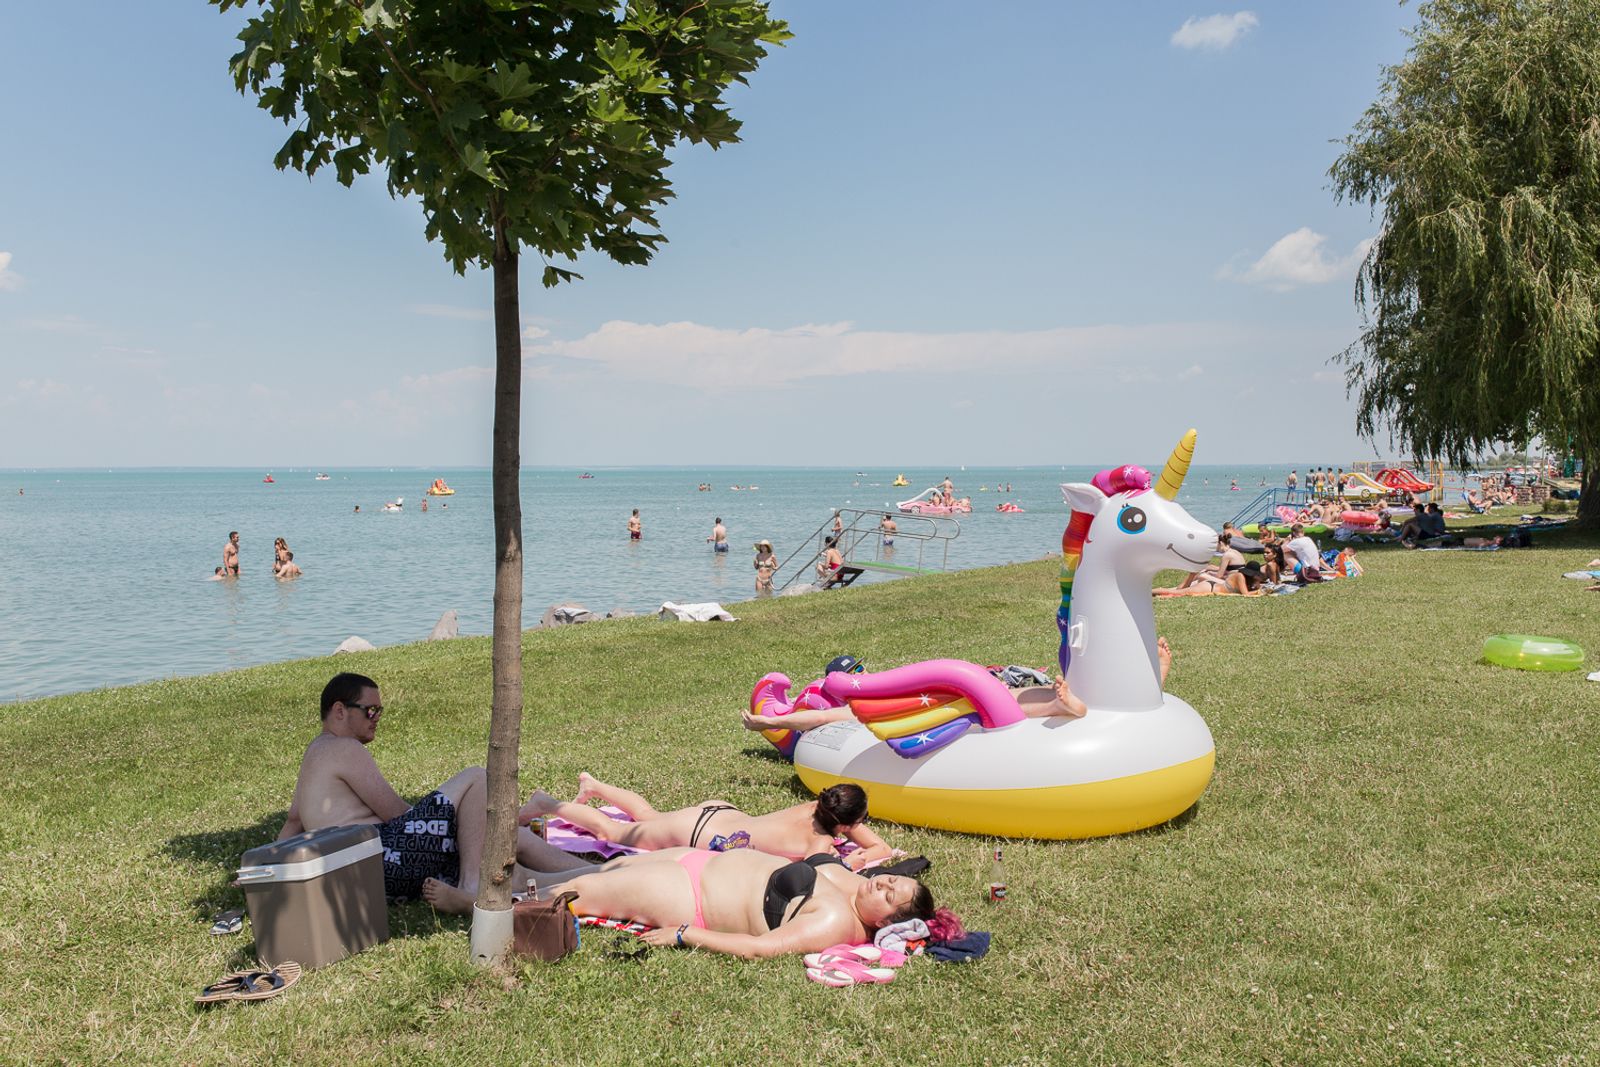 © Gianluca Abblasio - Image from the Balaton  -  The Hungarian Sea photography project